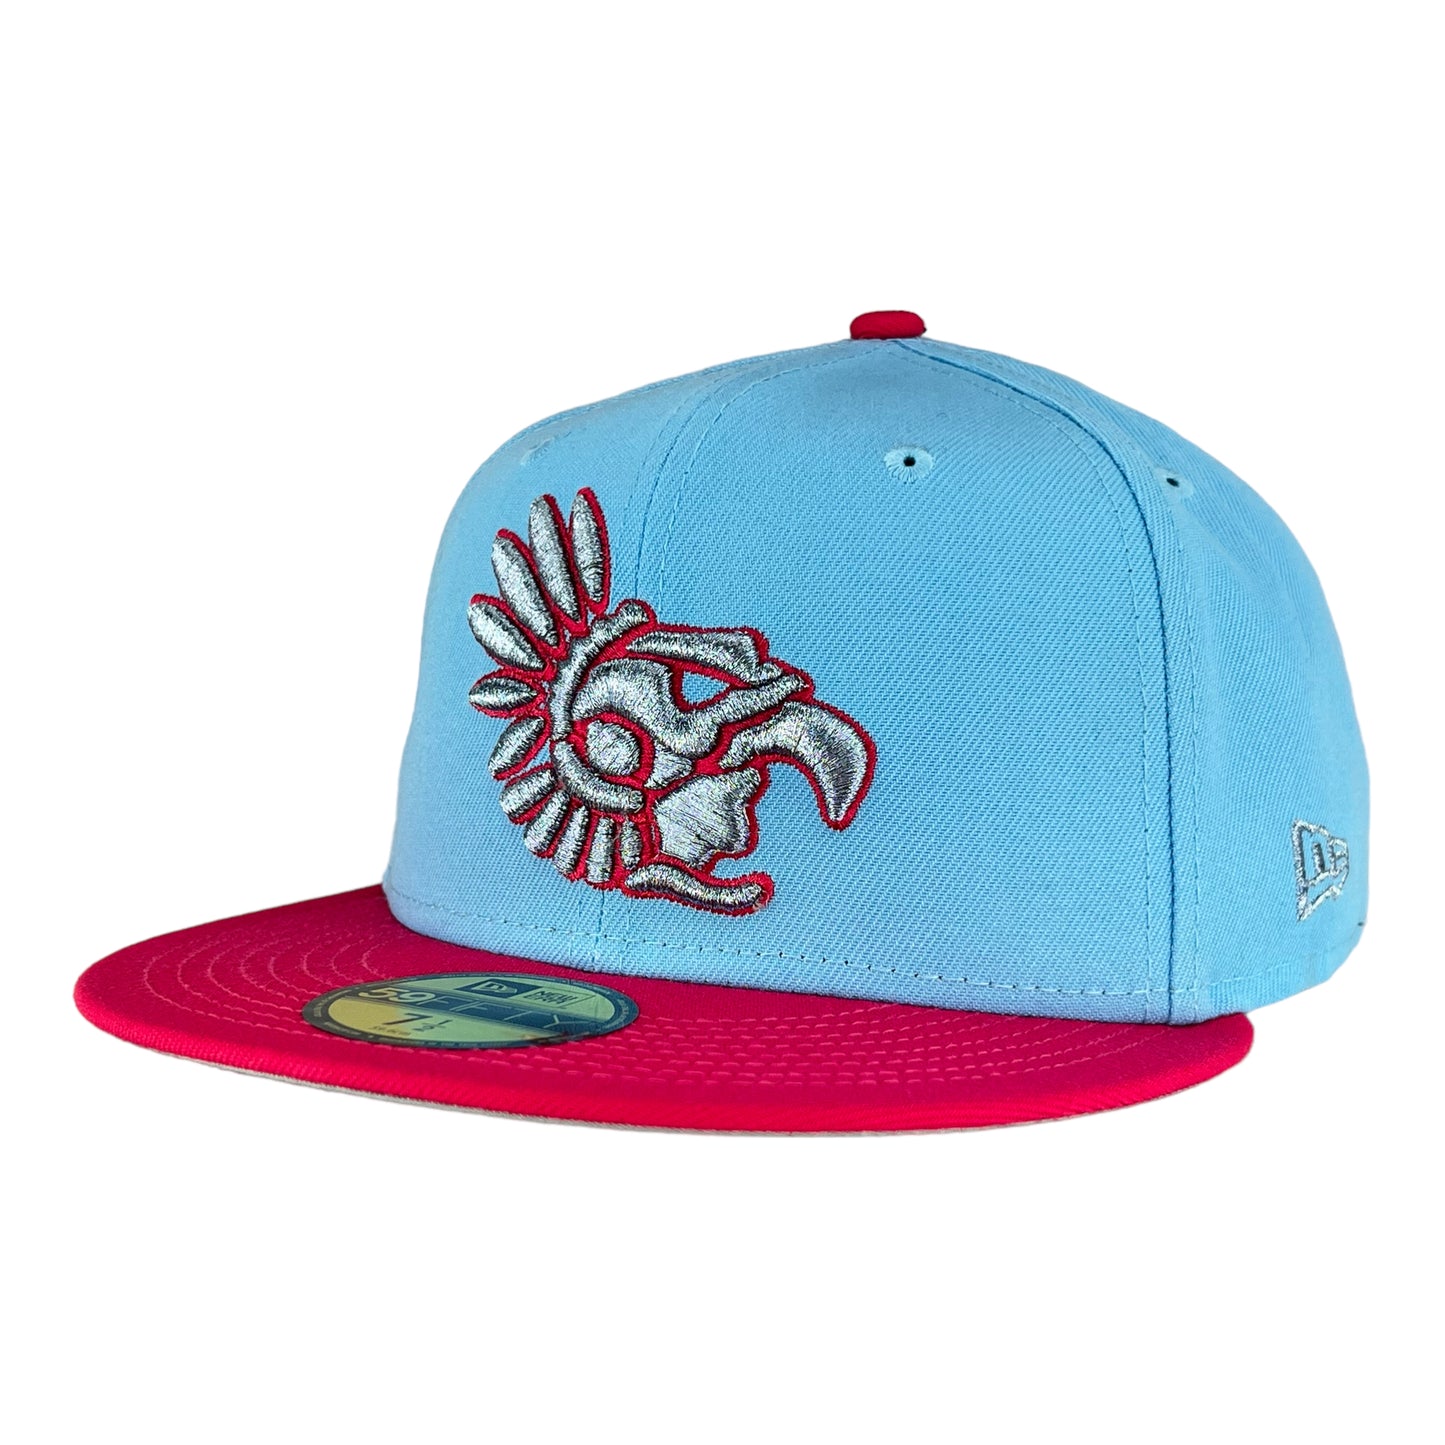 Mexico Aztec Bright Rose New Era 59FIFTY Fitted Hat